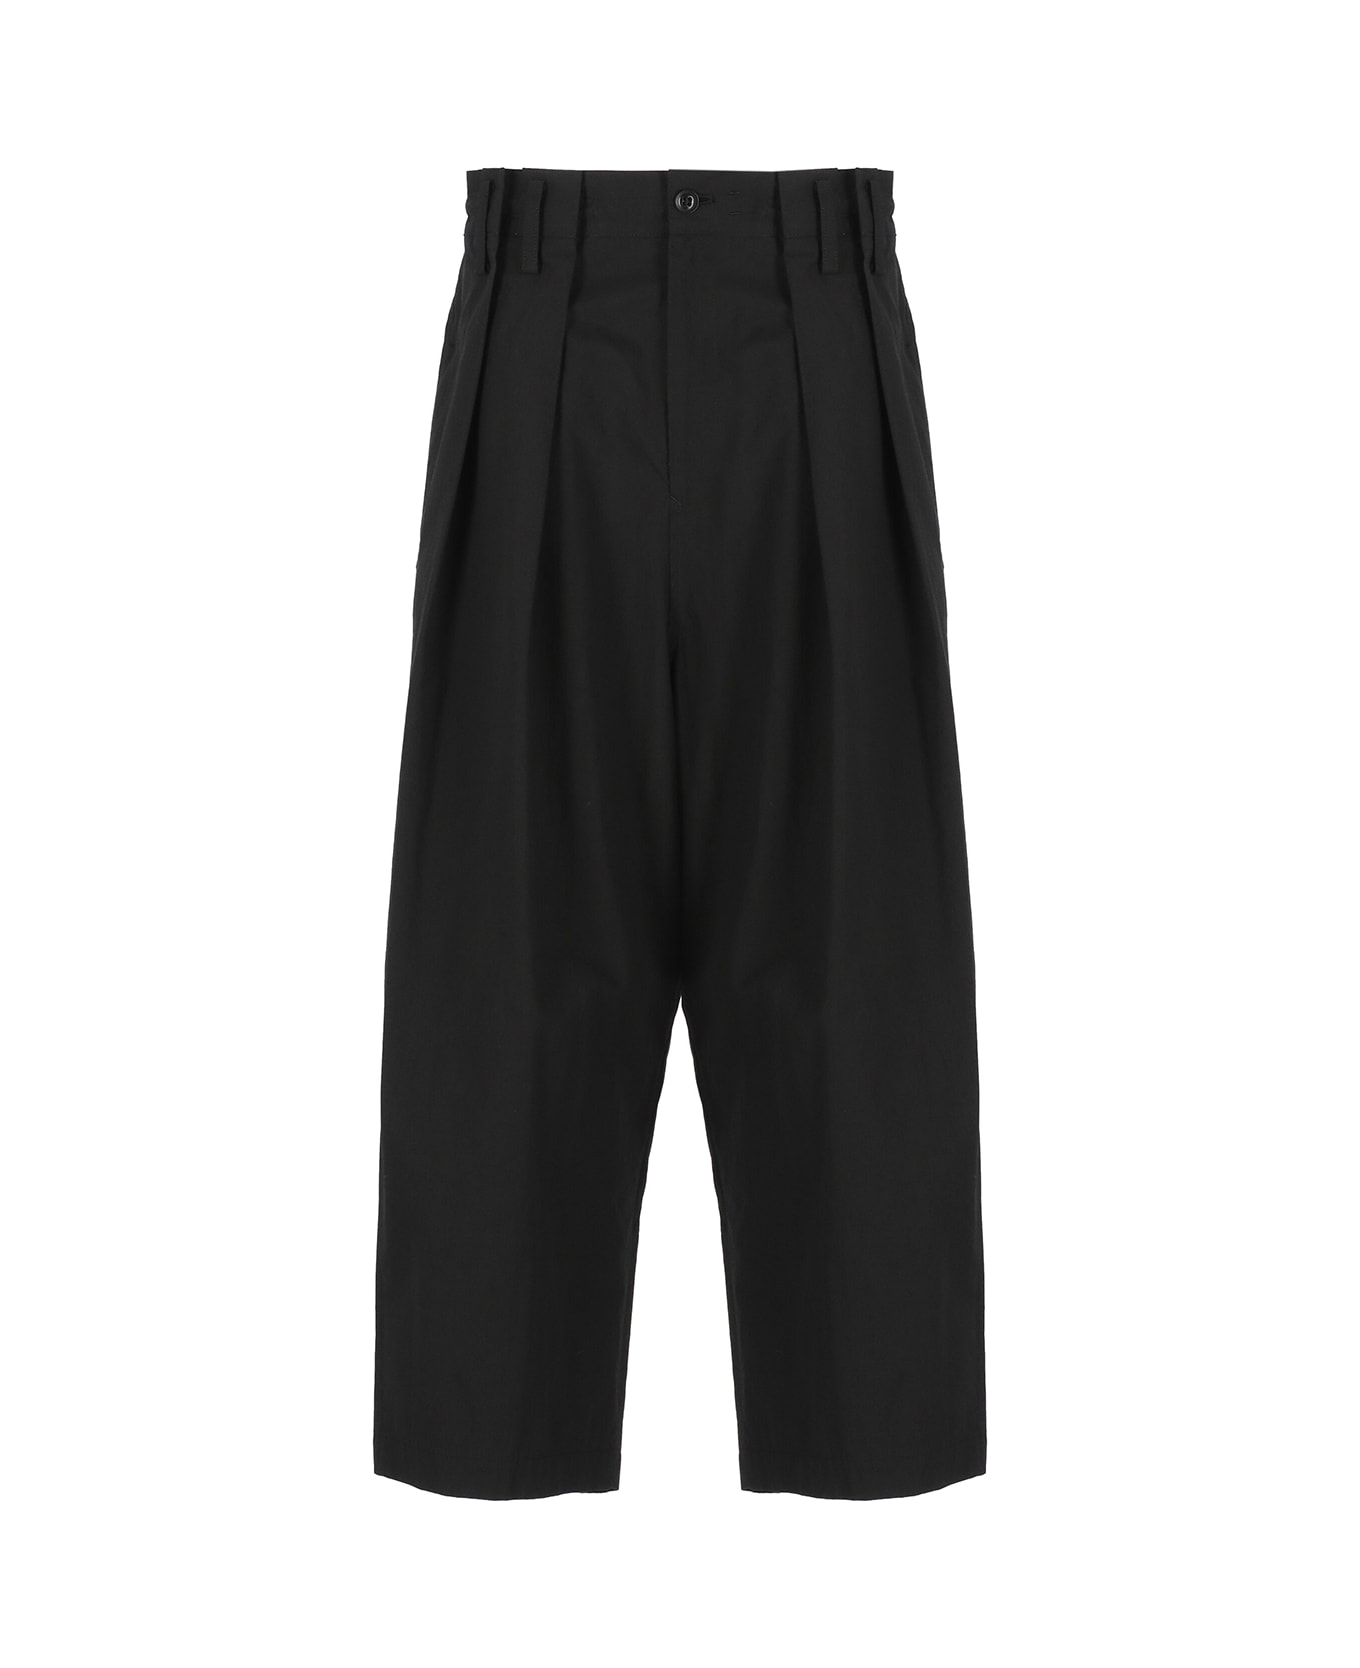 Y's Cotton Trousers - Black ボトムス